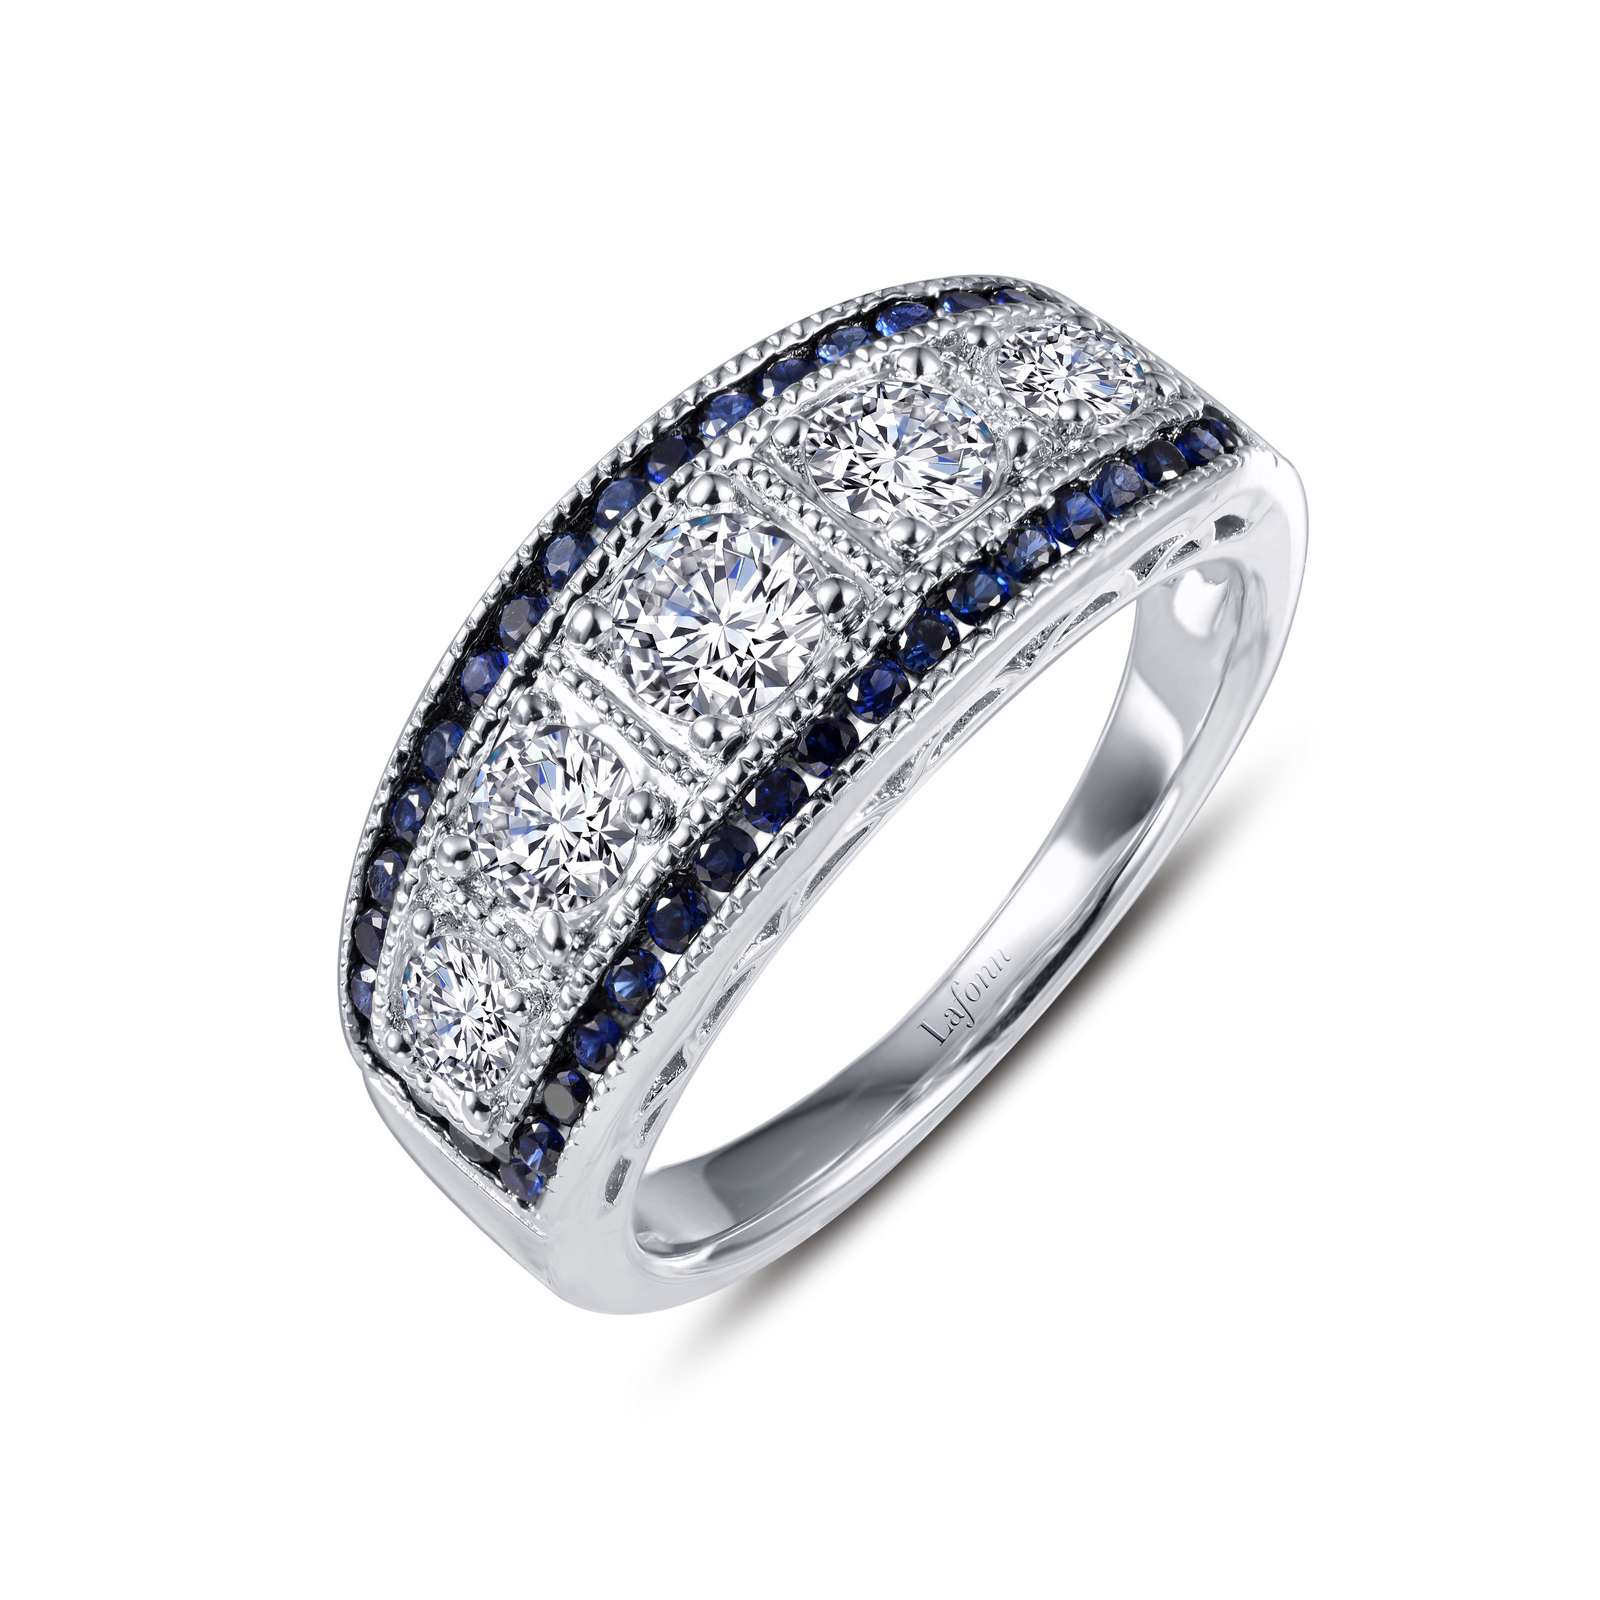 Heritage Synthetic Sapphire Platinum Bonded Ring Griner Jewelry Co. Moultrie, GA